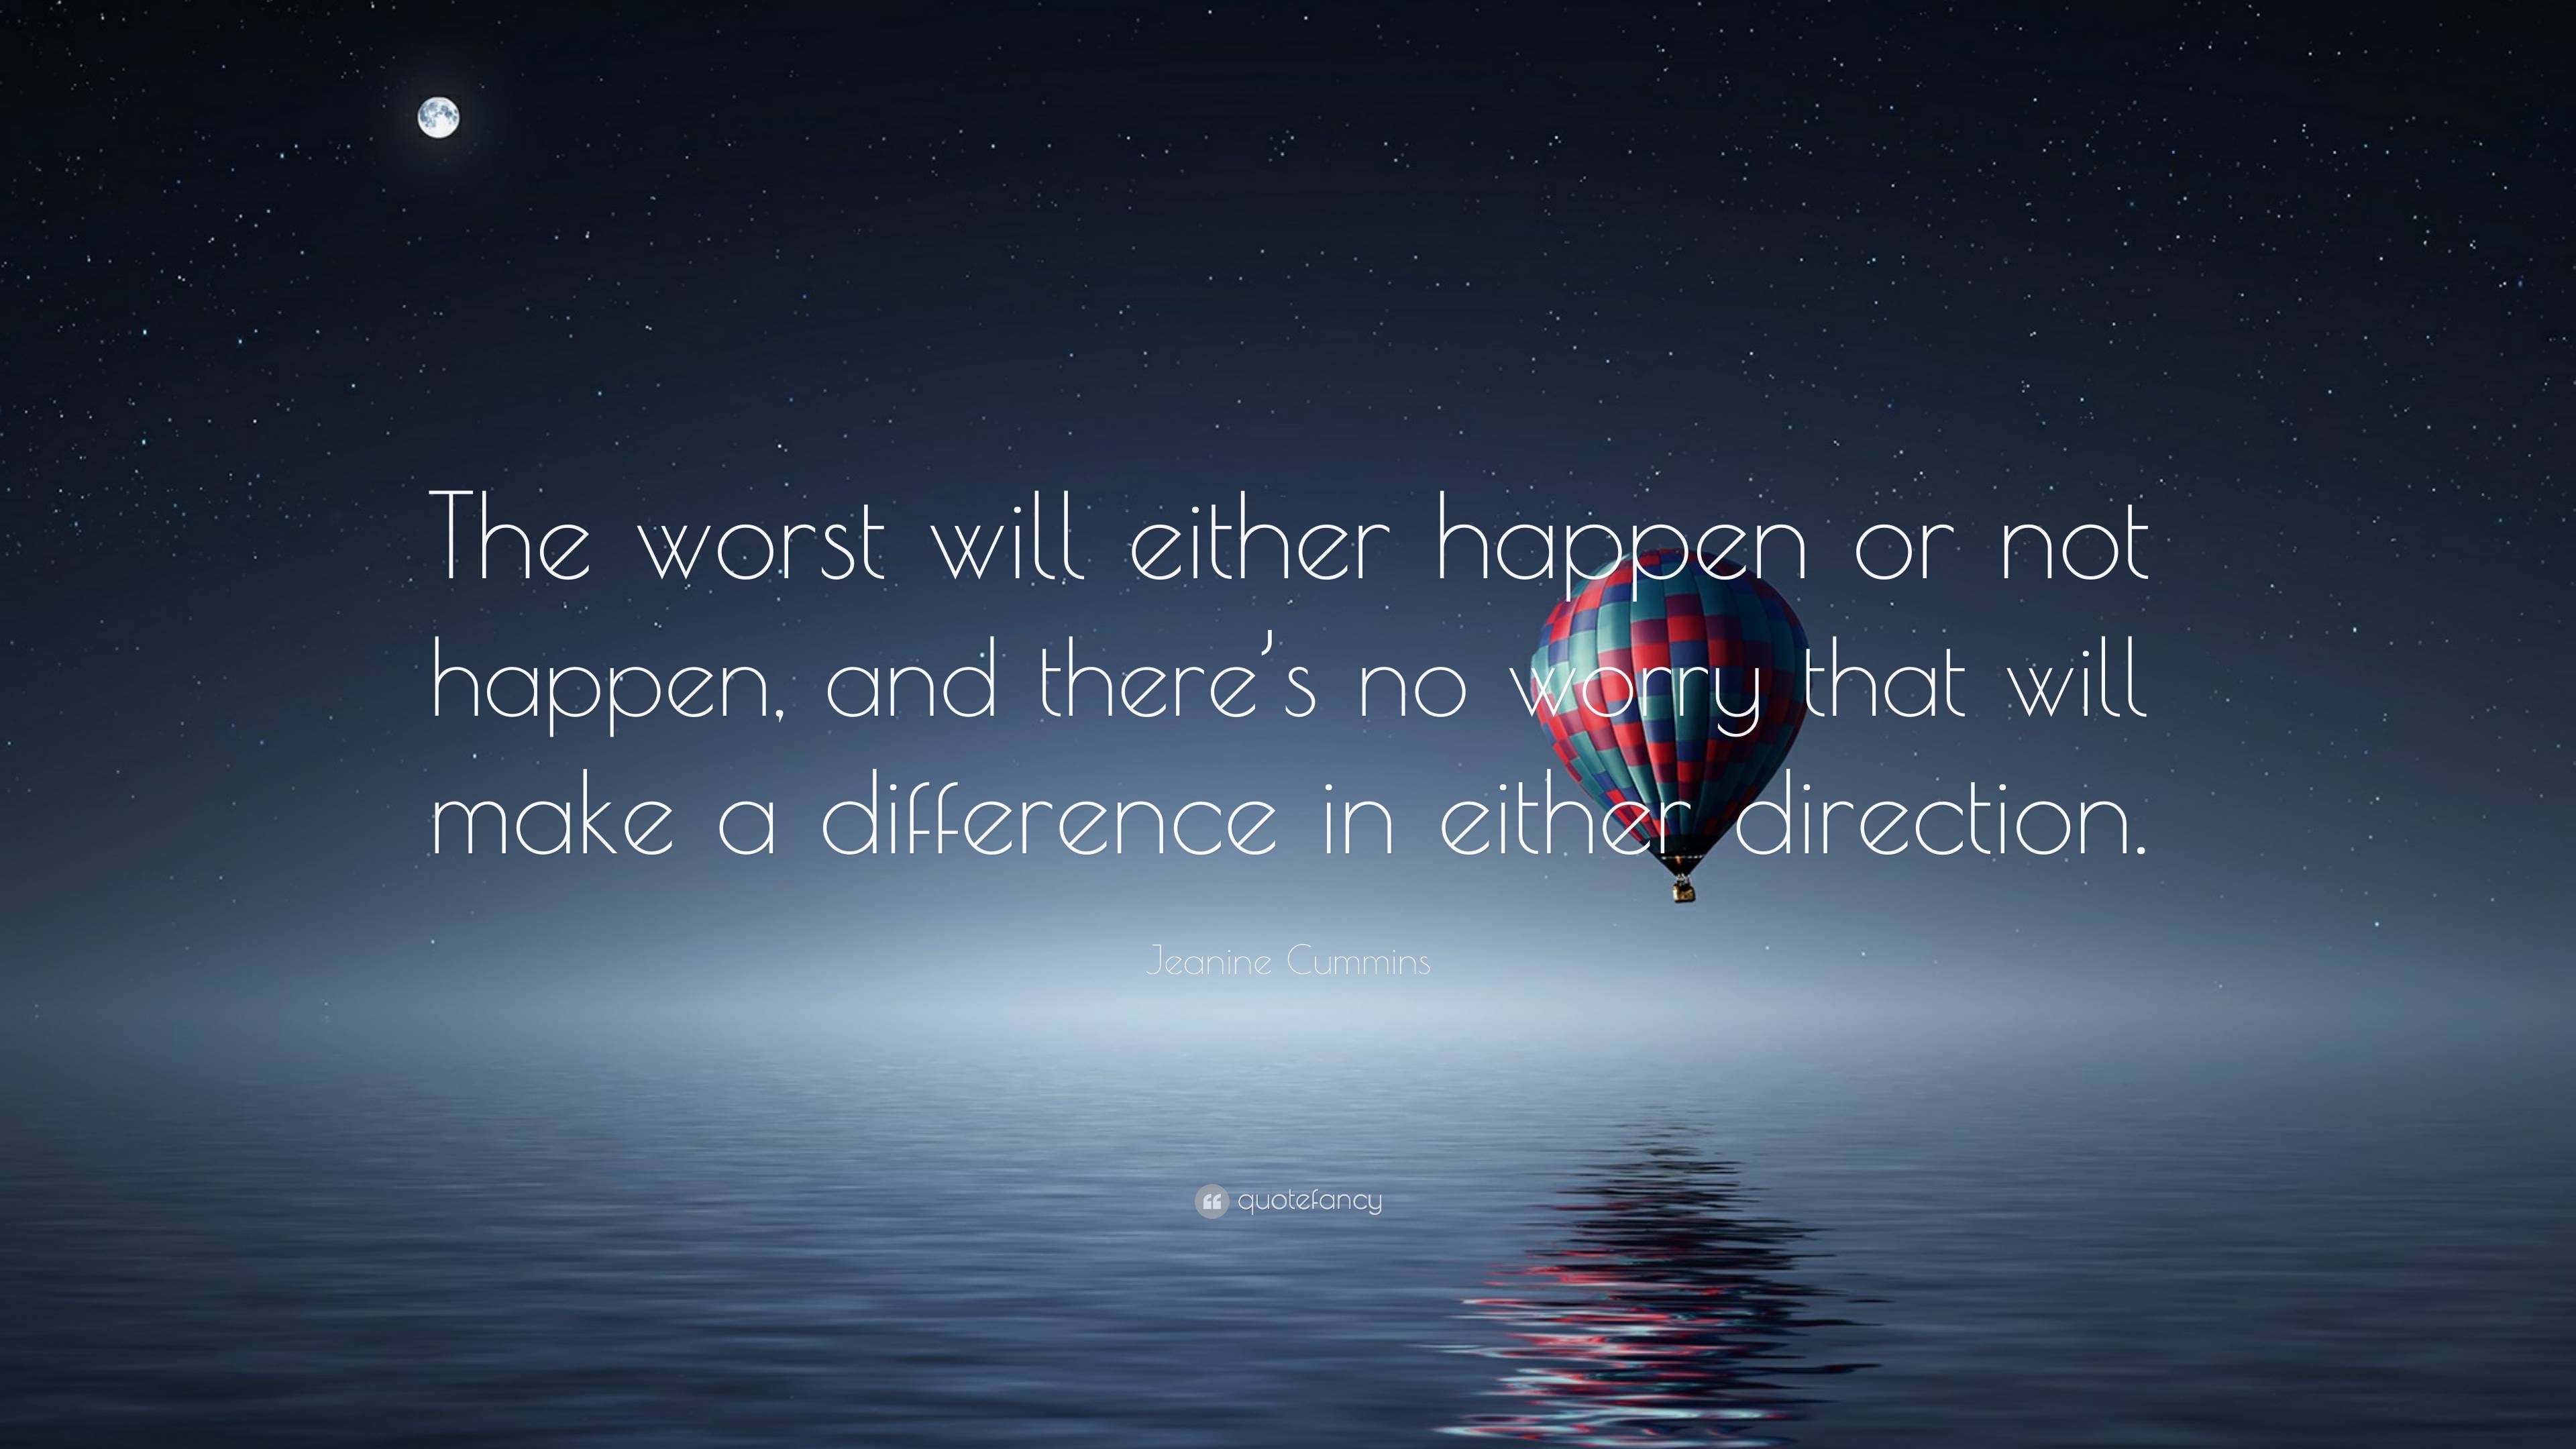 Jeanine Cummins Quote: “The worst will either happen or not happen, and ...